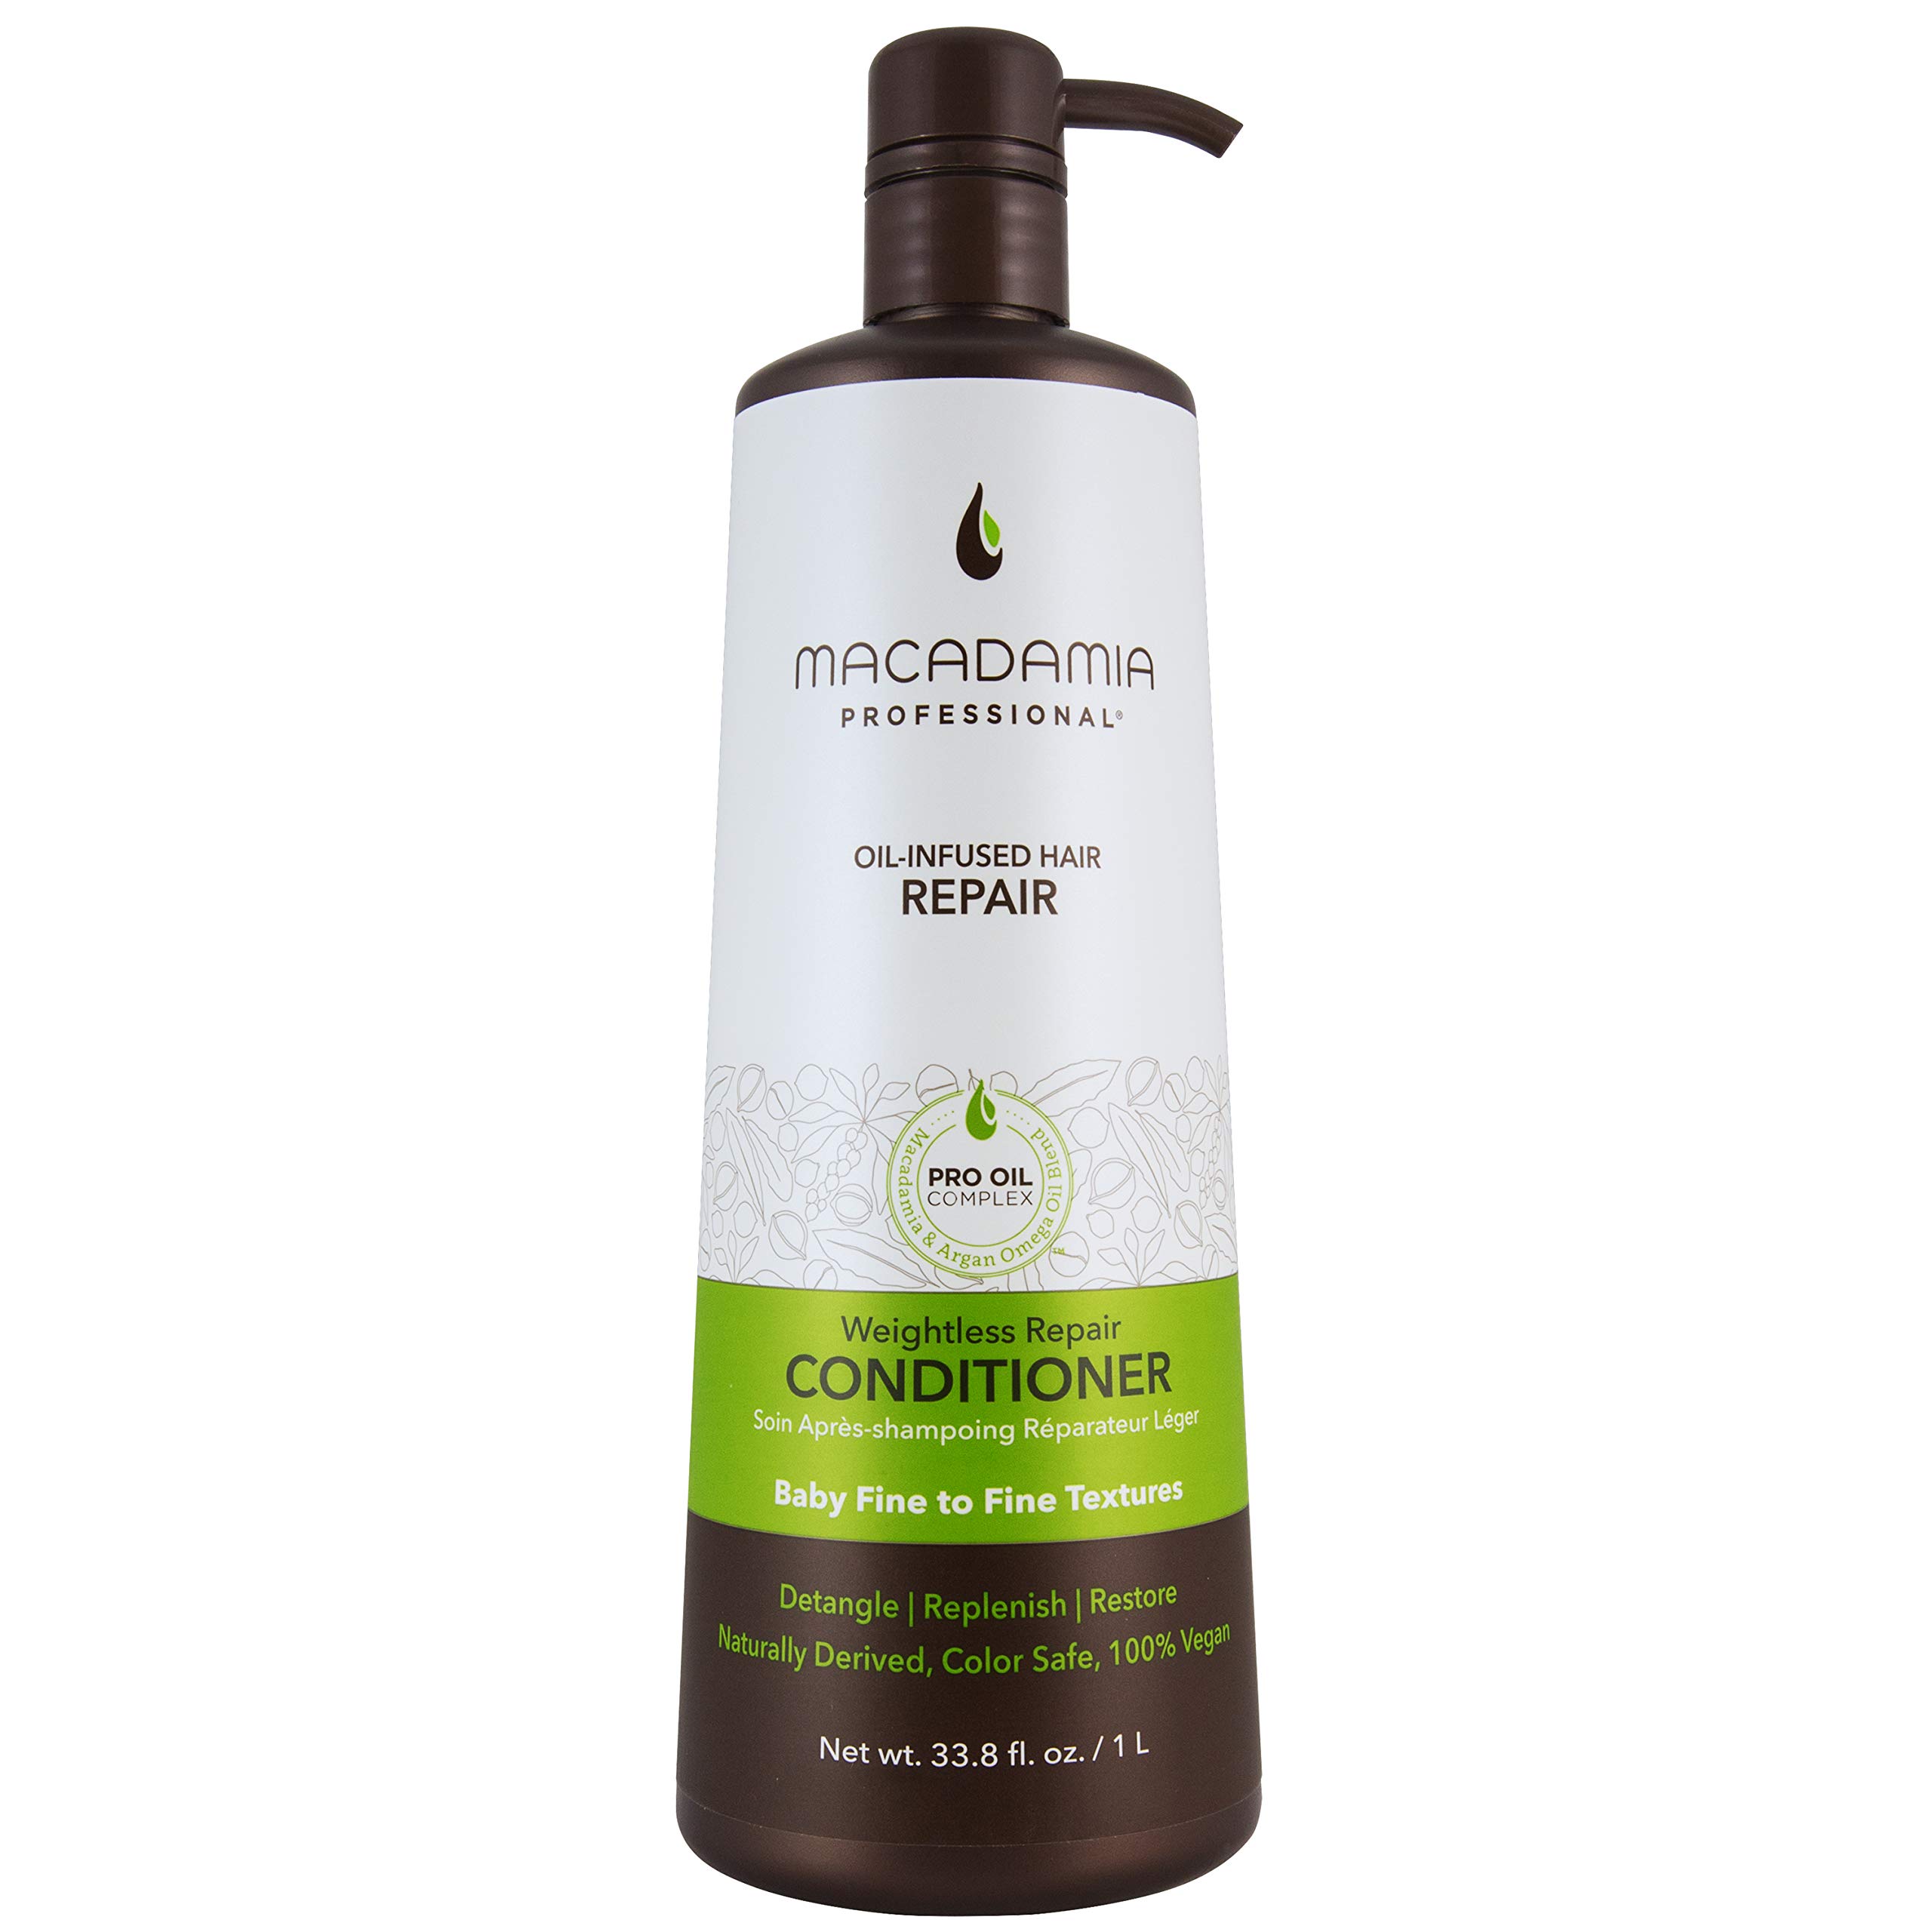 Macadamia Professional Hair Care Sulfate & Paraben Free Natural Organic Cruelty-Free Vegan Hair Products Weightless Repair Hair Conditioner, Green, Conditioner, 33.8 Fl Oz